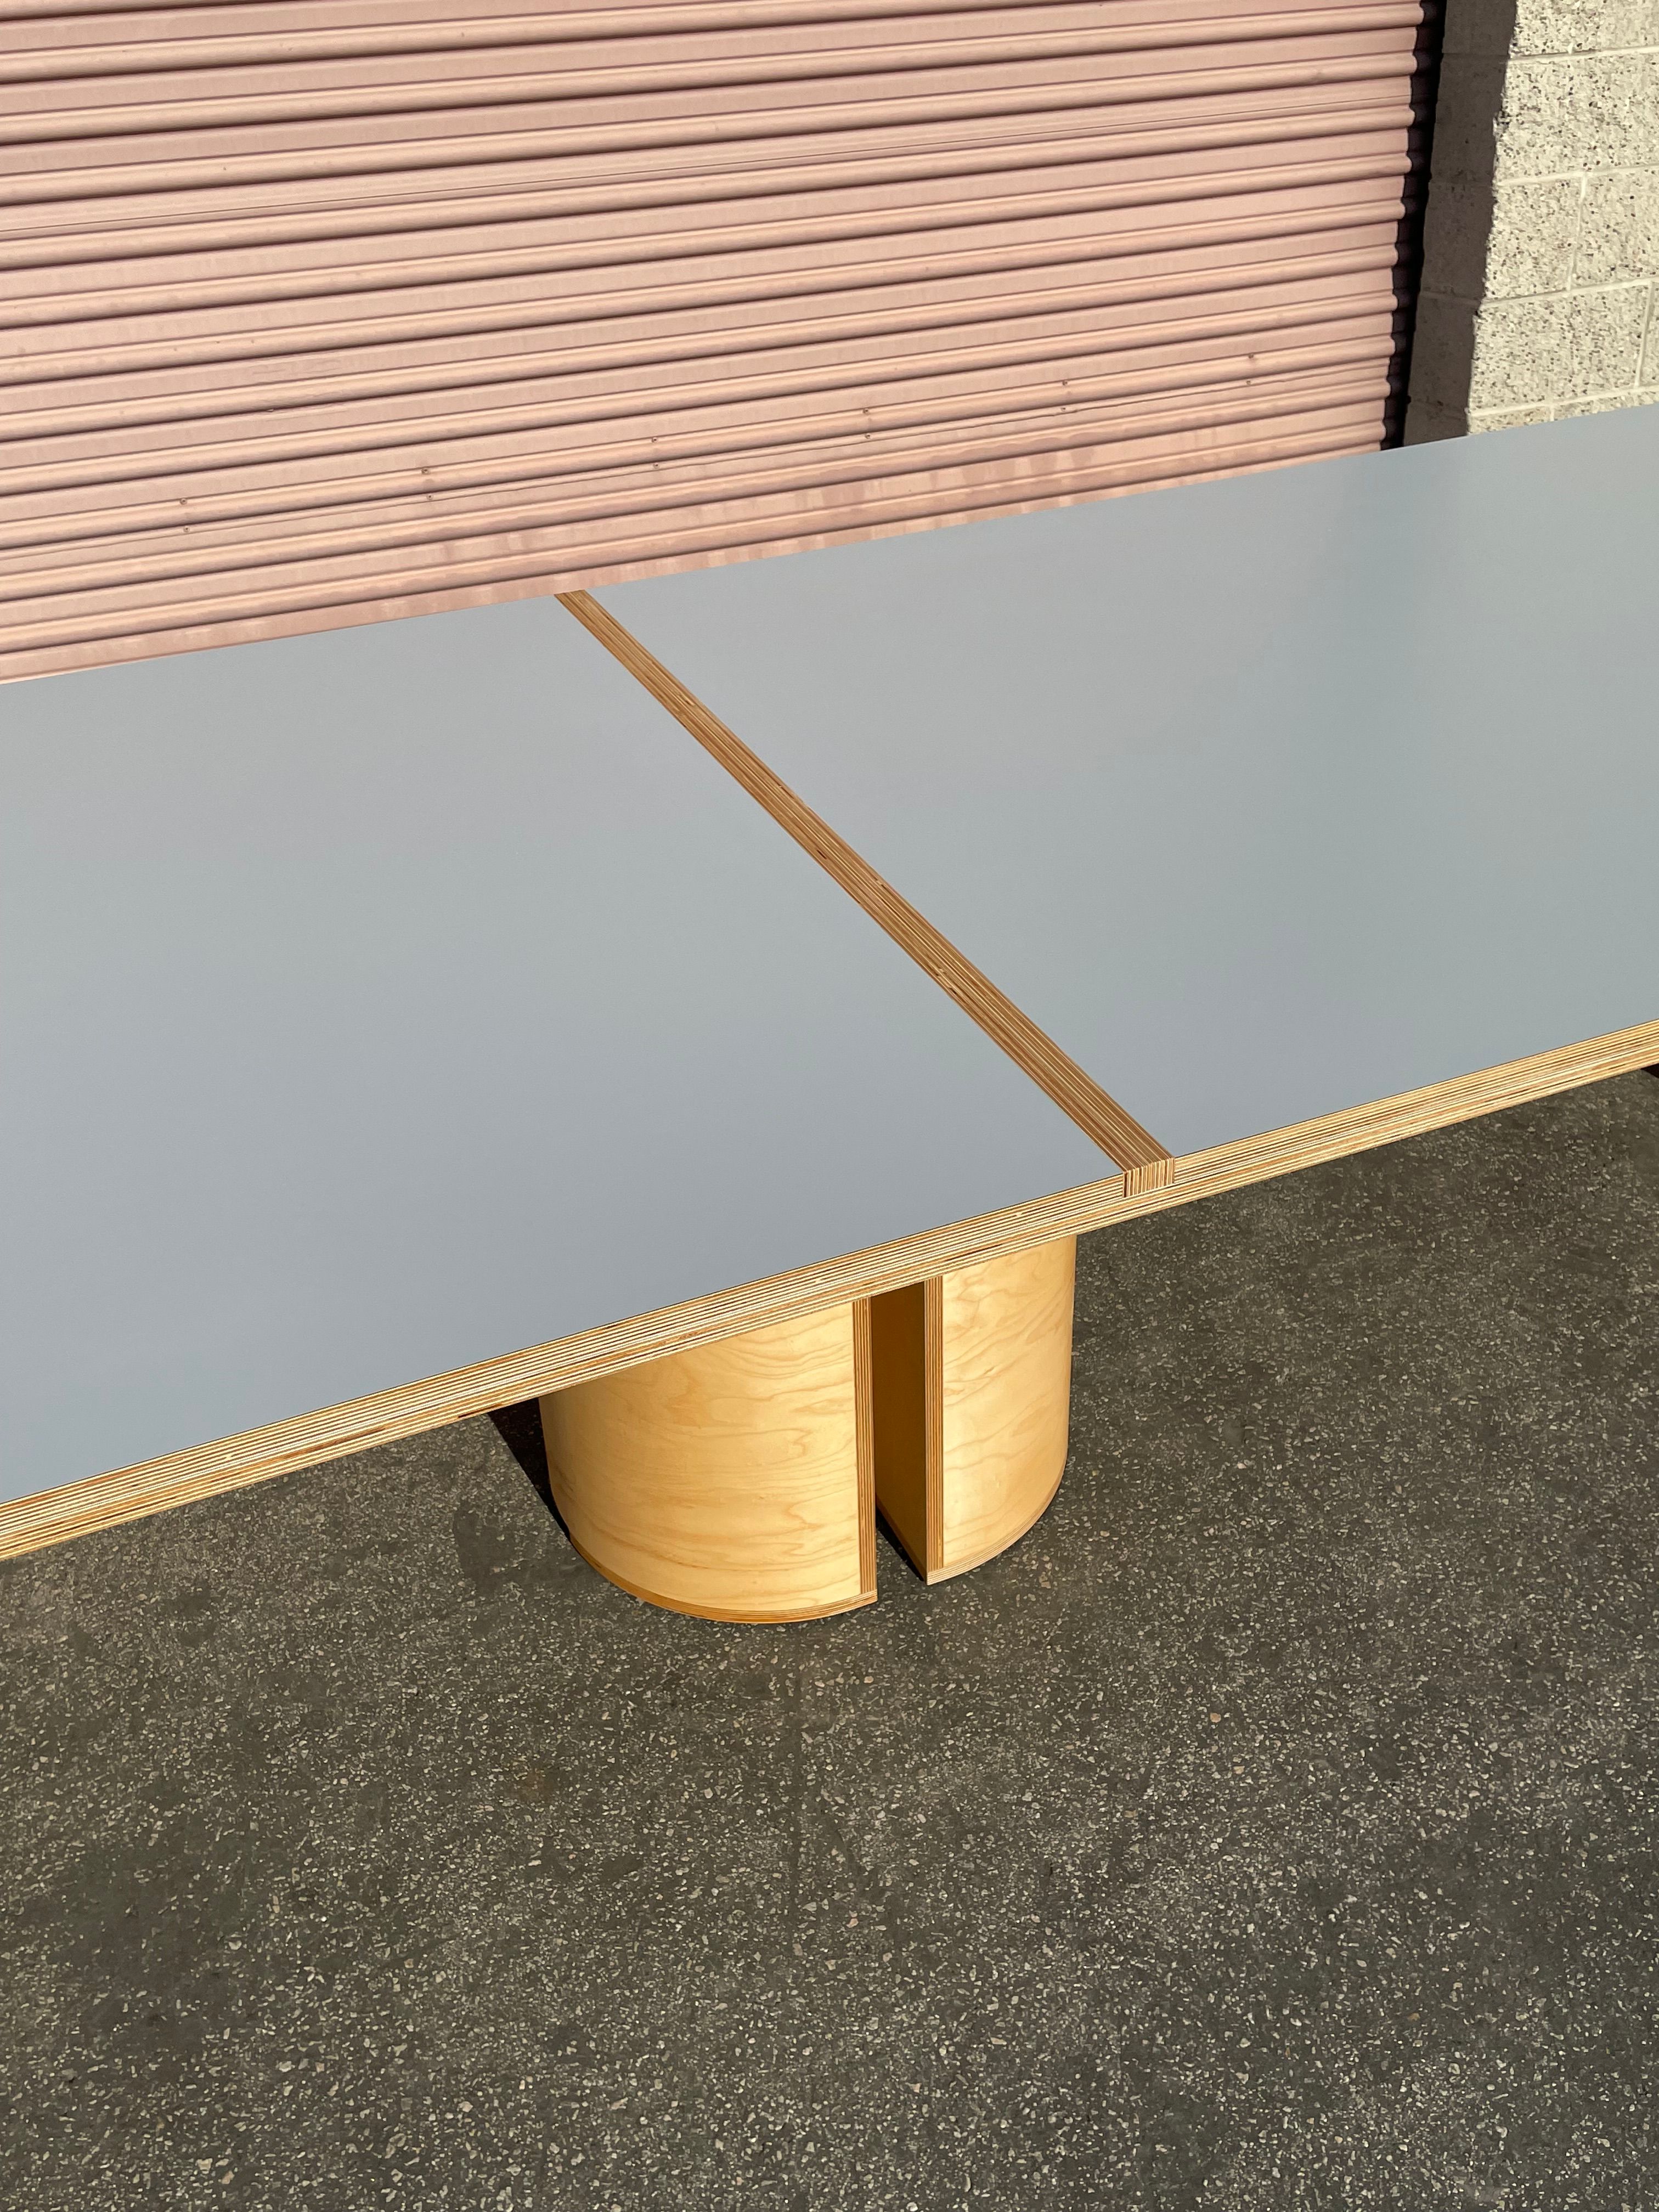  Conference Table - Annenberg Foundation product image 7